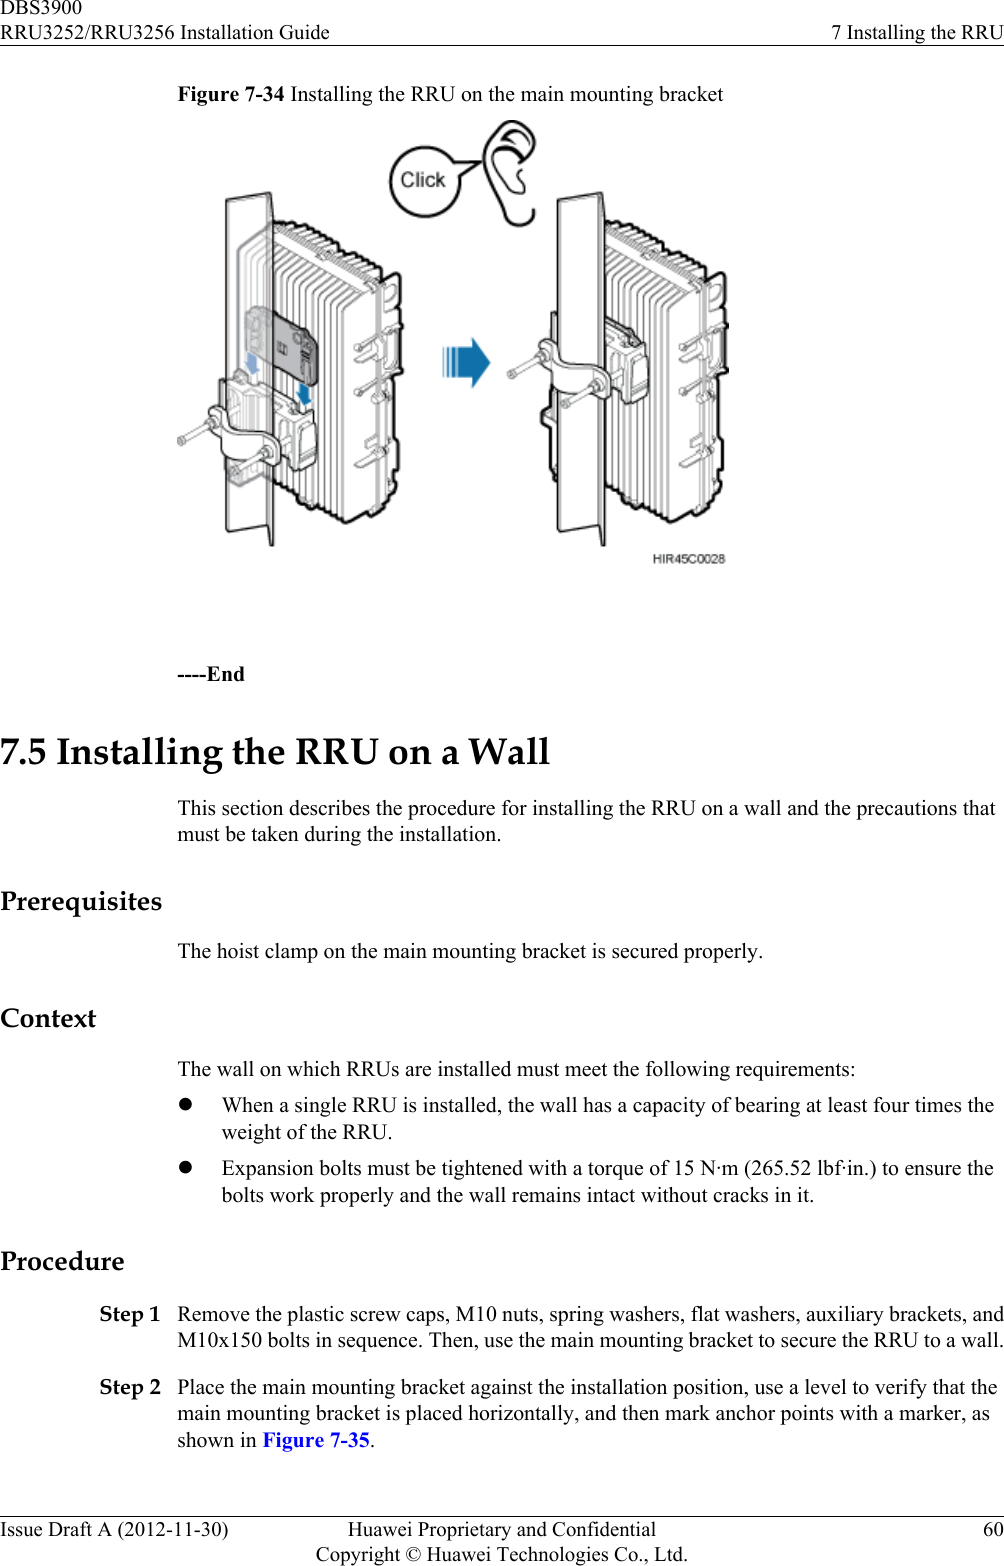 Figure 7-34 Installing the RRU on the main mounting bracket ----End7.5 Installing the RRU on a WallThis section describes the procedure for installing the RRU on a wall and the precautions thatmust be taken during the installation.PrerequisitesThe hoist clamp on the main mounting bracket is secured properly.ContextThe wall on which RRUs are installed must meet the following requirements:lWhen a single RRU is installed, the wall has a capacity of bearing at least four times theweight of the RRU.lExpansion bolts must be tightened with a torque of 15 N·m (265.52 lbf·in.) to ensure thebolts work properly and the wall remains intact without cracks in it.ProcedureStep 1 Remove the plastic screw caps, M10 nuts, spring washers, flat washers, auxiliary brackets, andM10x150 bolts in sequence. Then, use the main mounting bracket to secure the RRU to a wall.Step 2 Place the main mounting bracket against the installation position, use a level to verify that themain mounting bracket is placed horizontally, and then mark anchor points with a marker, asshown in Figure 7-35.DBS3900RRU3252/RRU3256 Installation Guide 7 Installing the RRUIssue Draft A (2012-11-30) Huawei Proprietary and ConfidentialCopyright © Huawei Technologies Co., Ltd.60